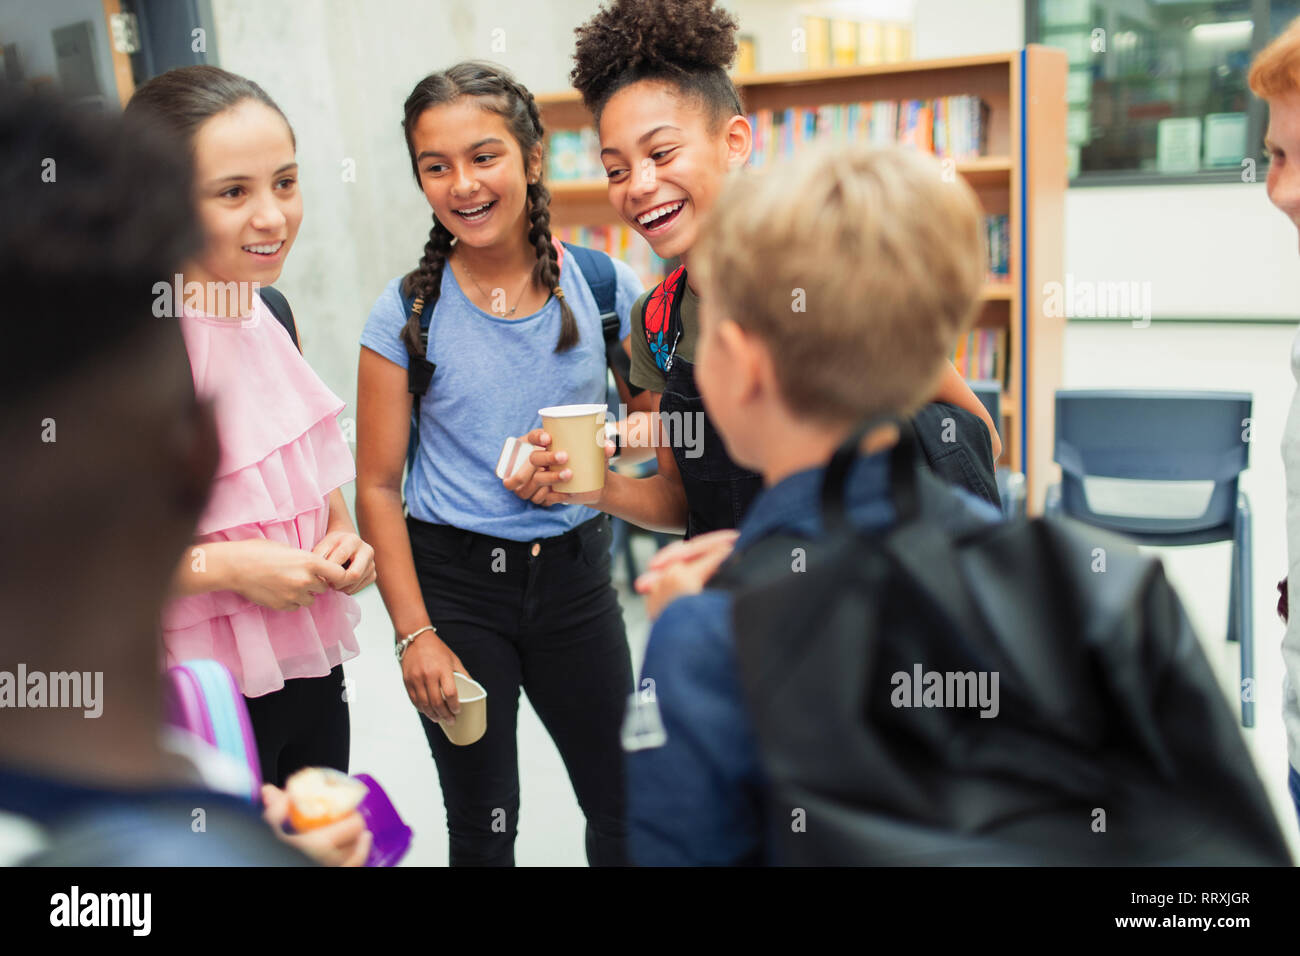 Junior high students talking, hanging out Stock Photo